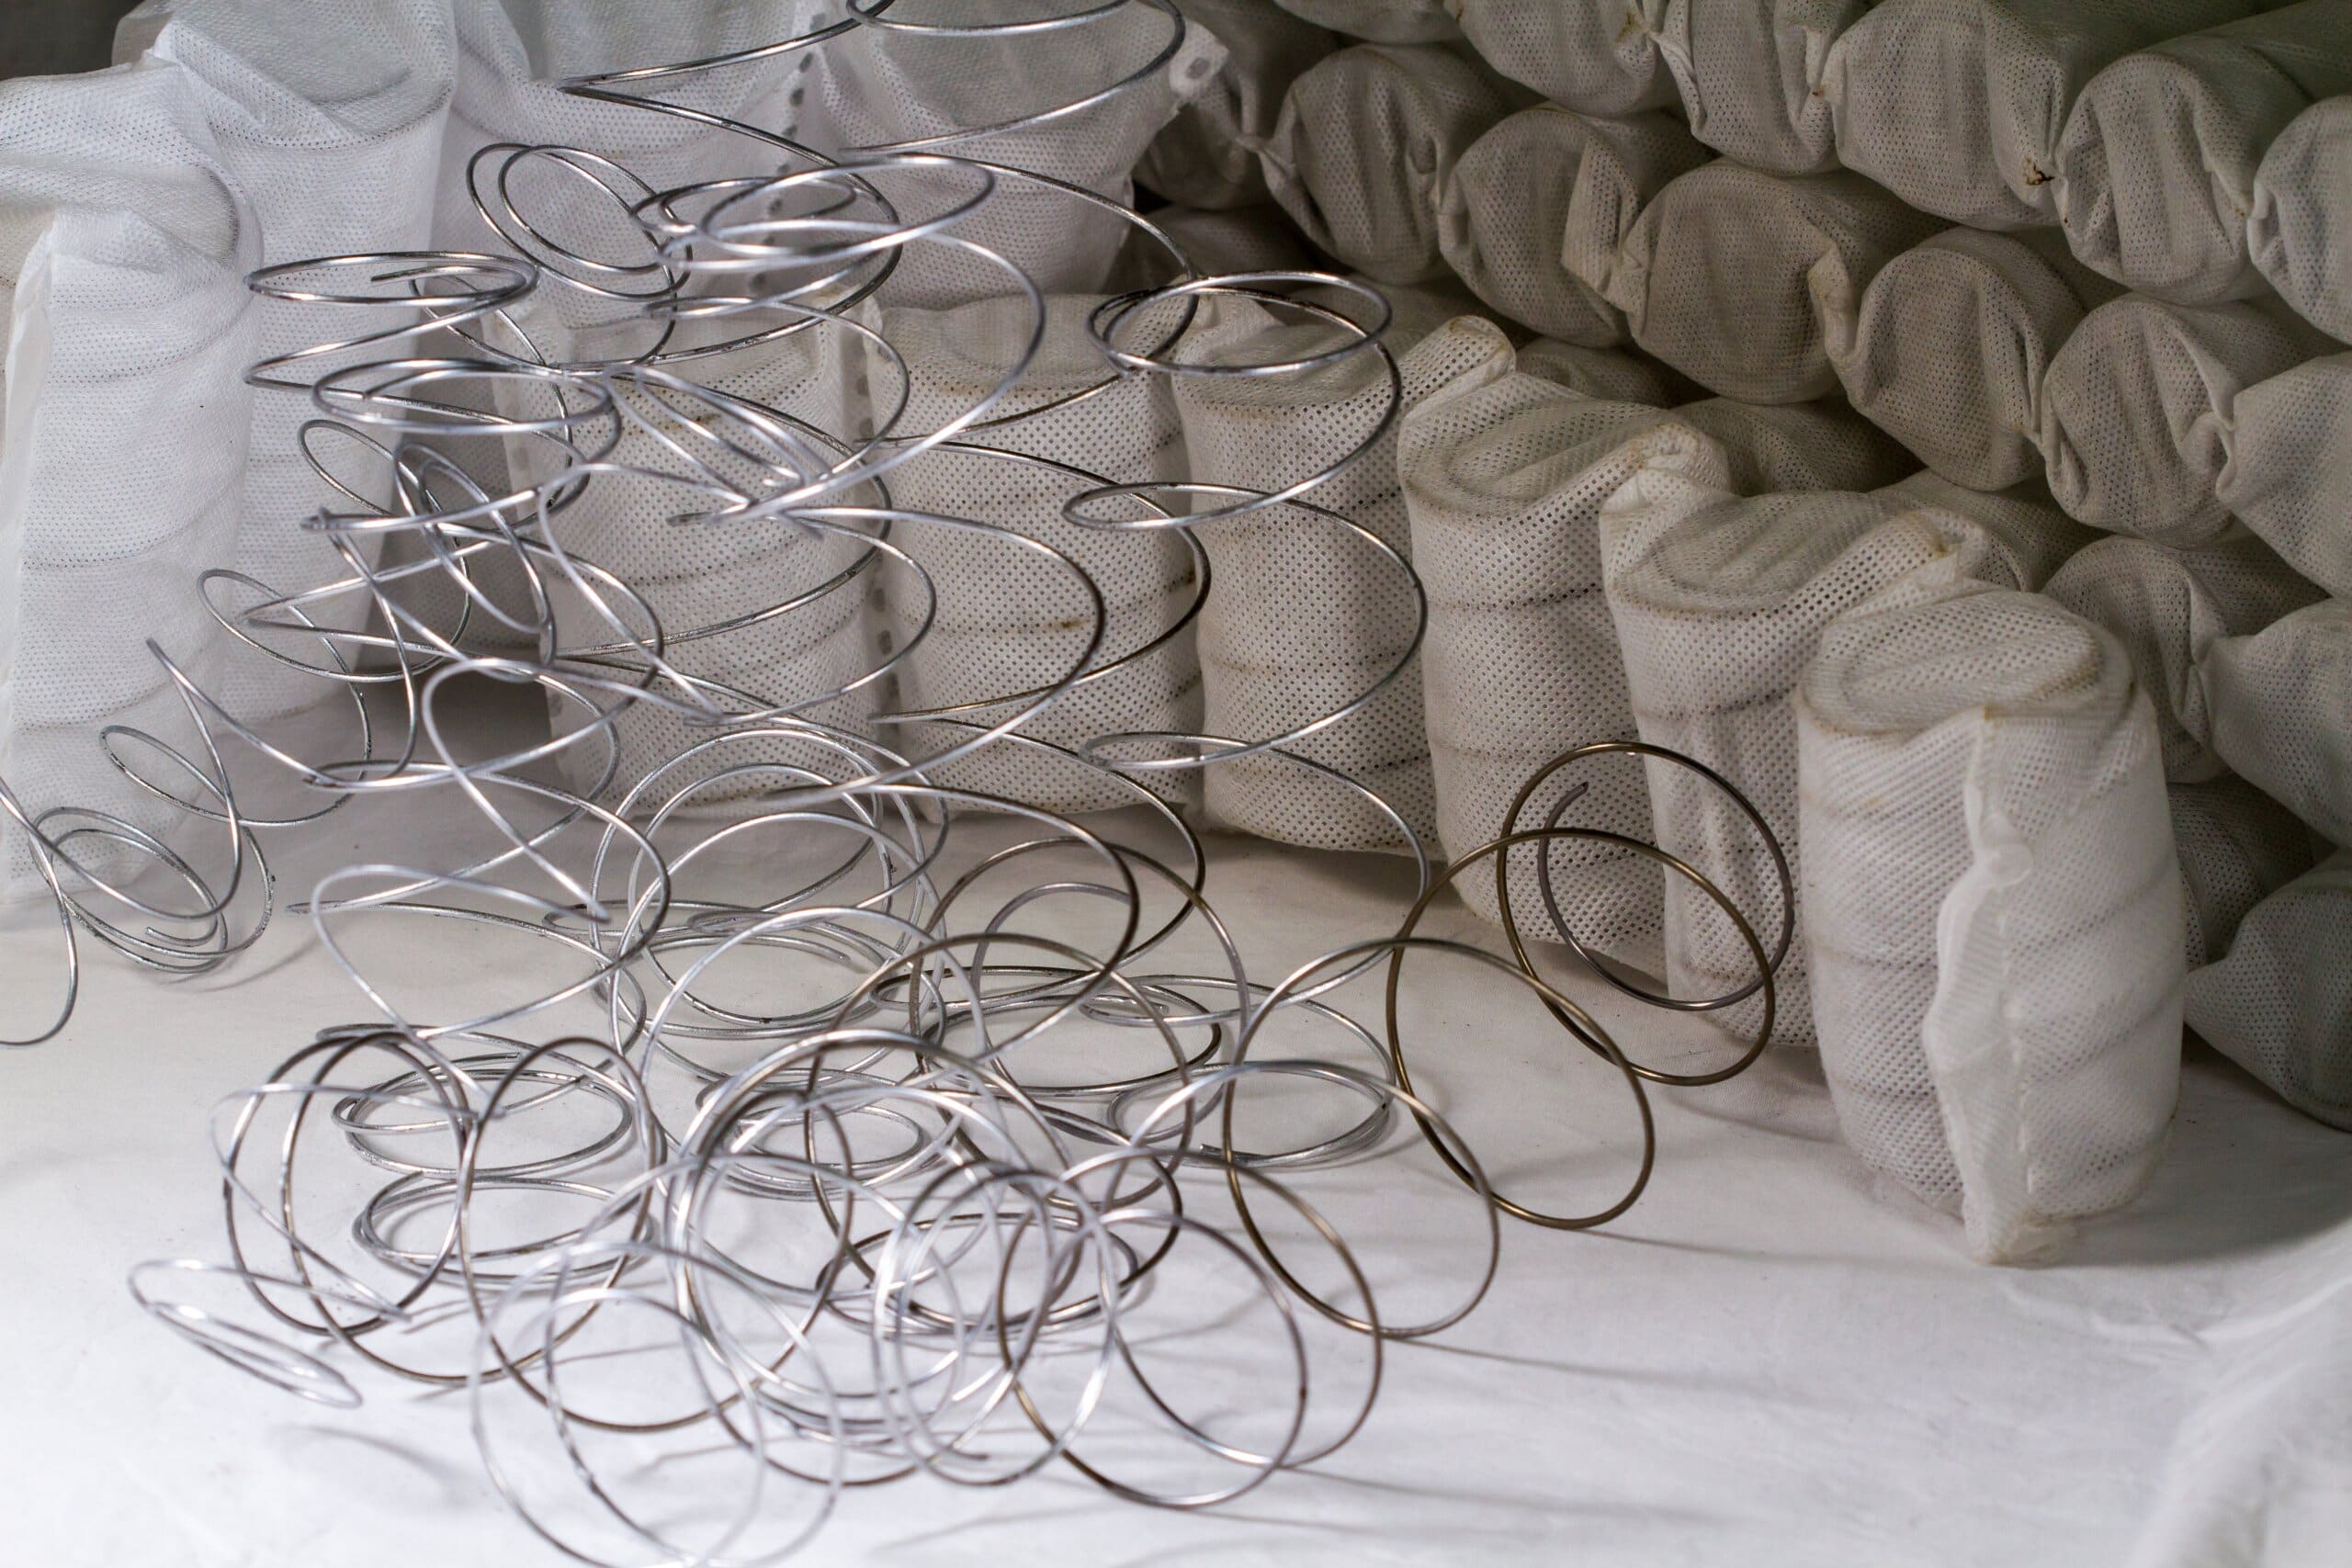 Mattress springs in a pile next to pocket springs.